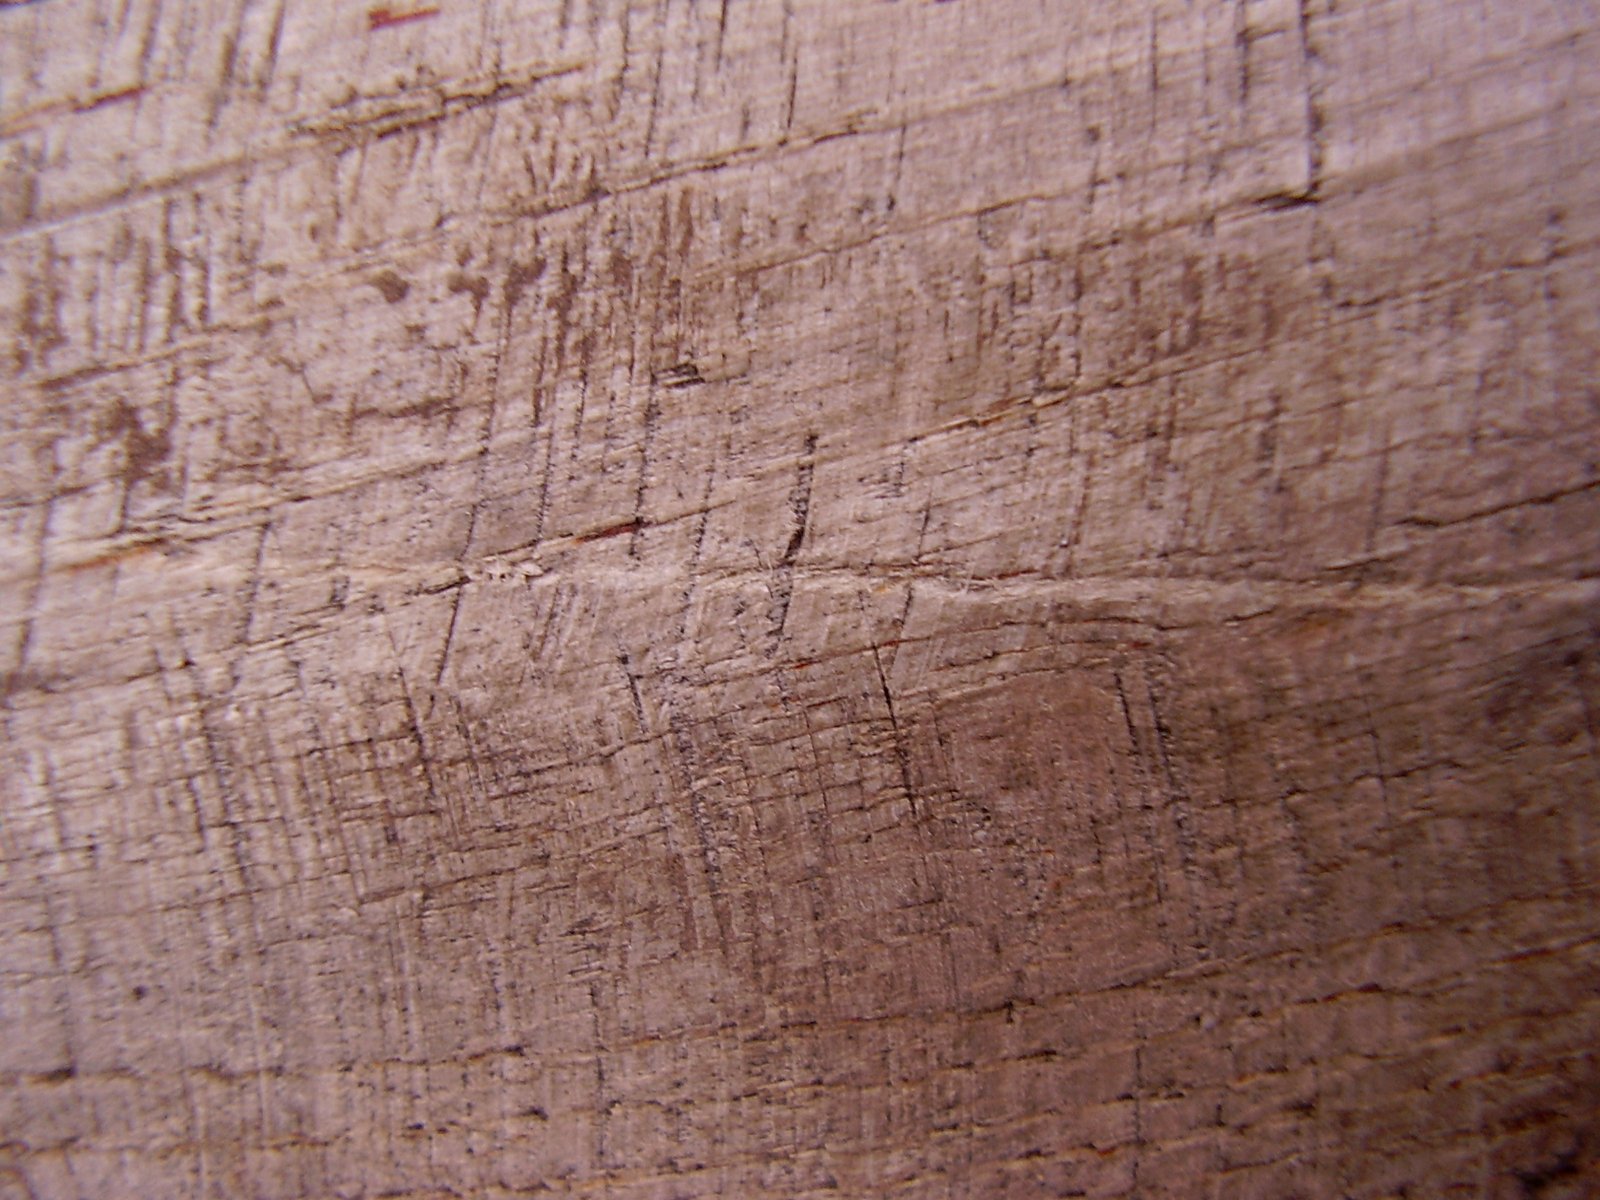 an abstract image of wood grain showing that the pattern is not yet